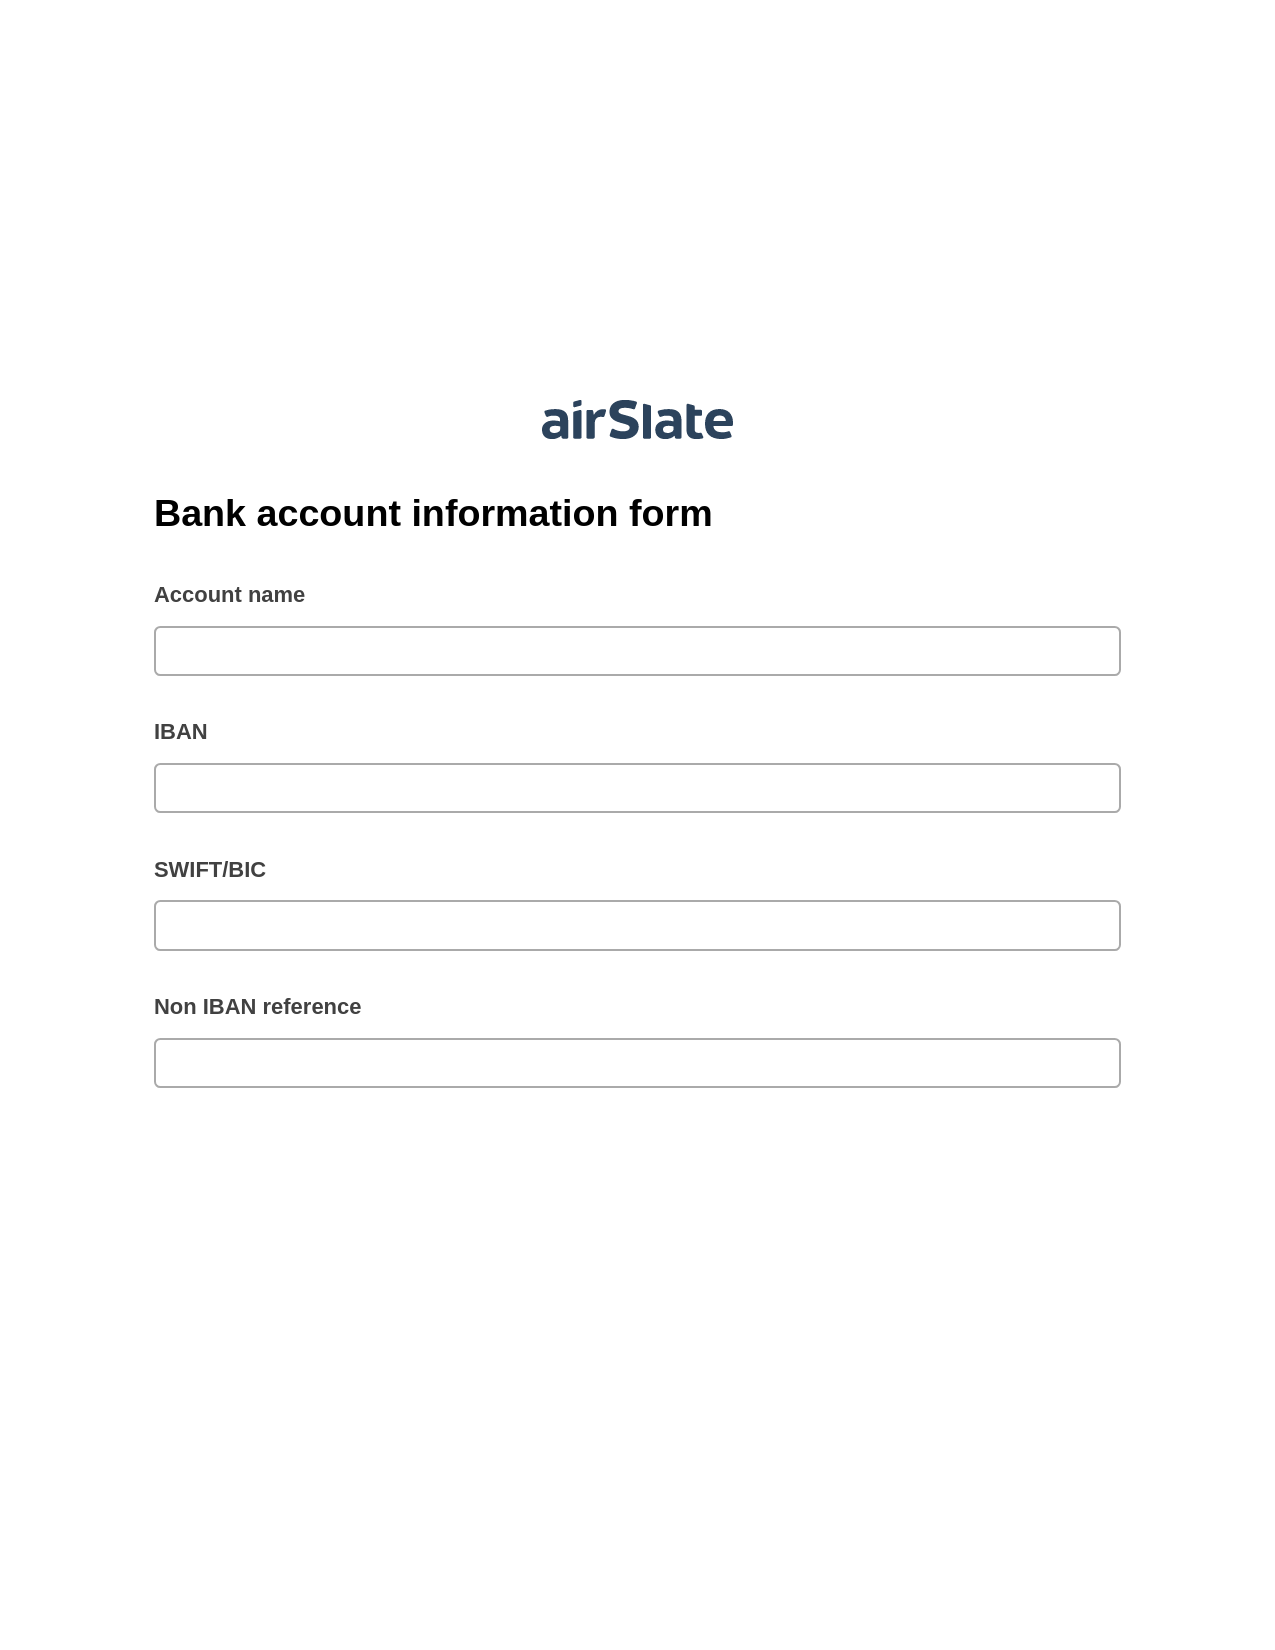 Bank account information form Pre-fill from NetSuite Records Bot, Unassign Role Bot, Export to Excel 365 Bot